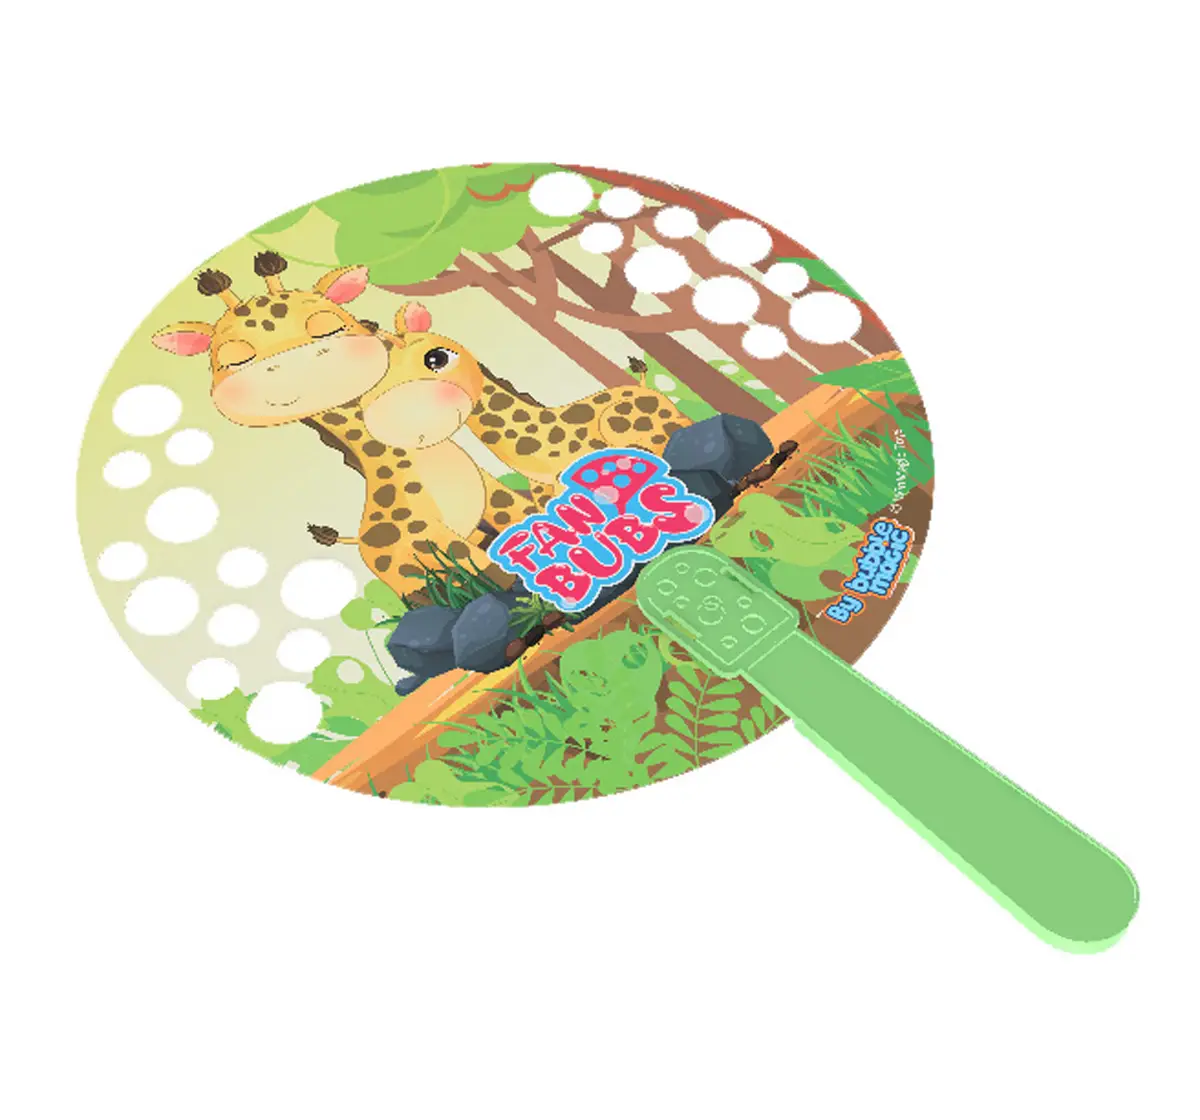 Bubble Magic Fan Bubs Giraffe, for The Kids 3 Years and Above